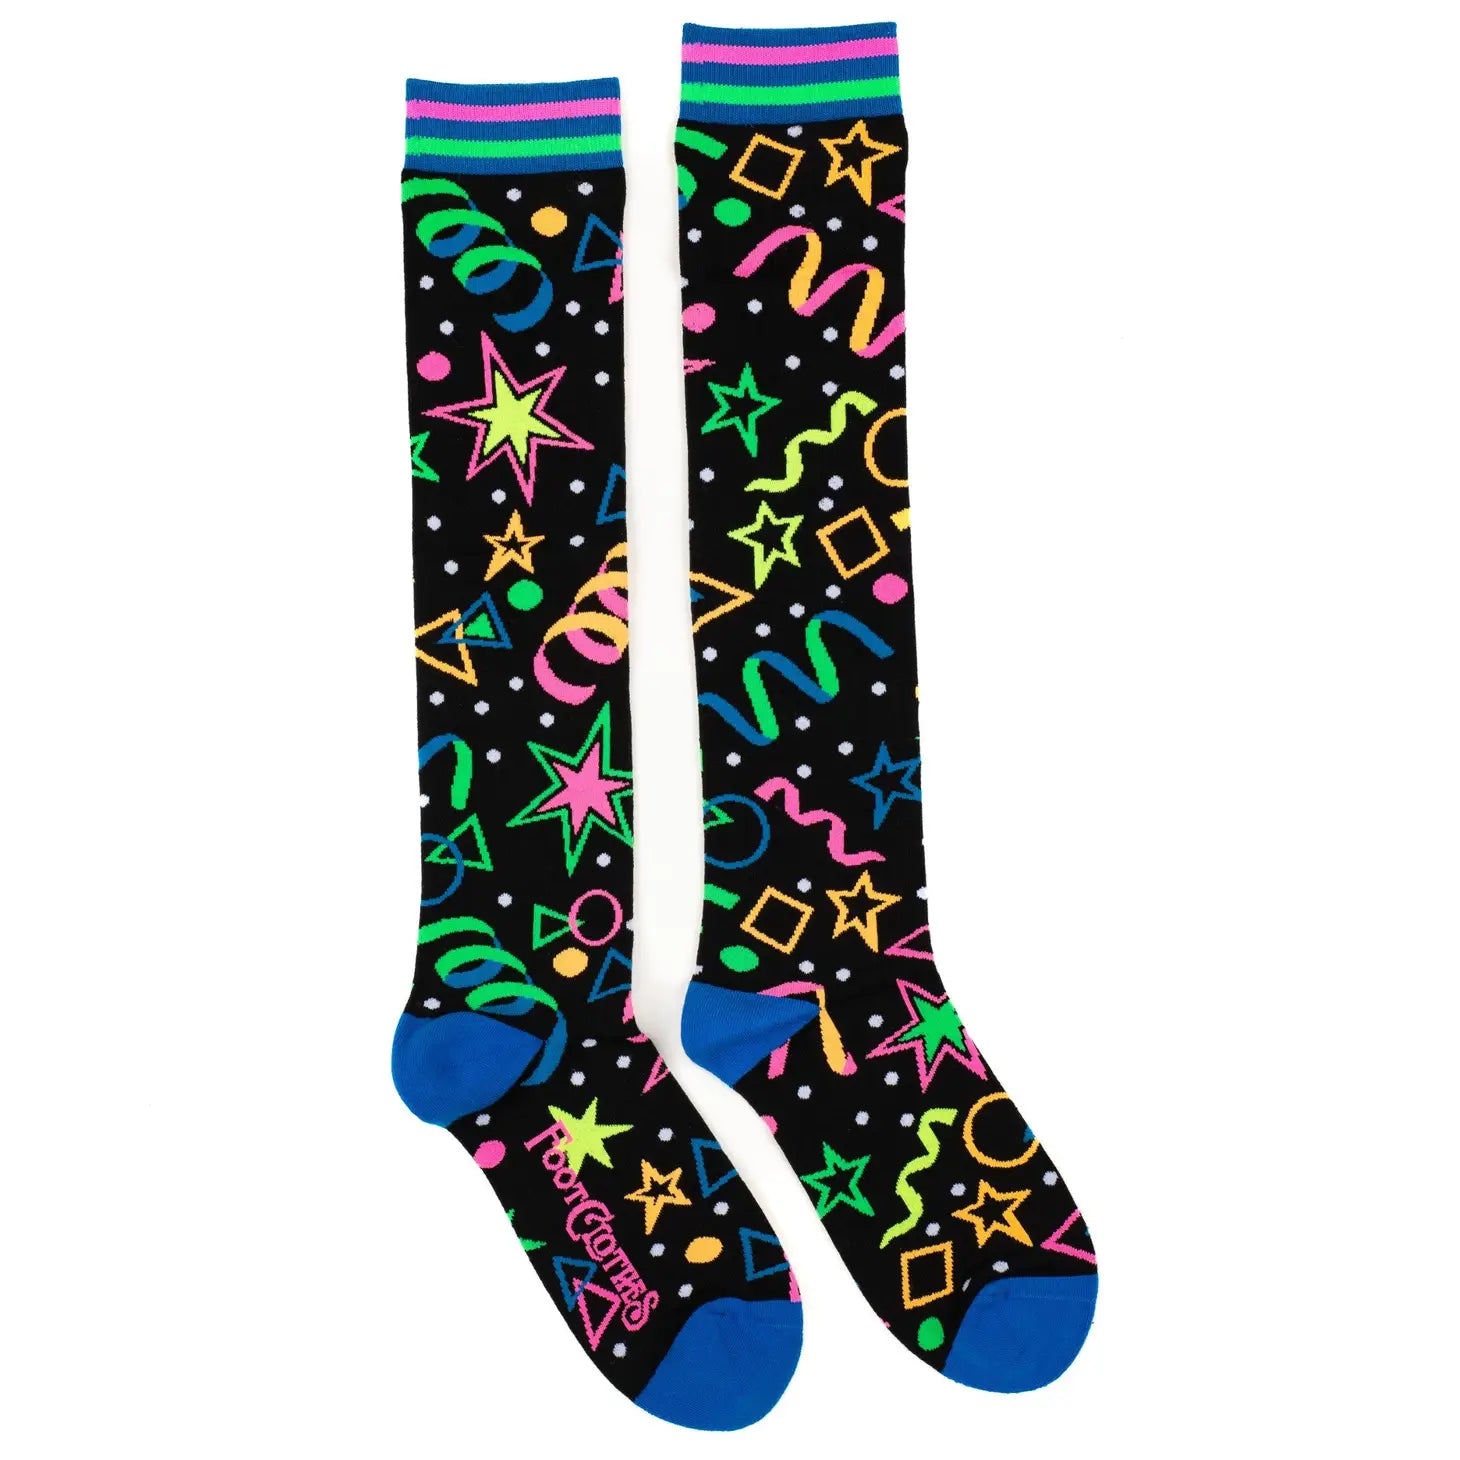 A pair of black knee socks with neon blue, green, and pink stripes at the cuff and blue toes & heels. There is a neon colored geometric pattern along the calf of each sock similar to an 80s bowling alley carpet